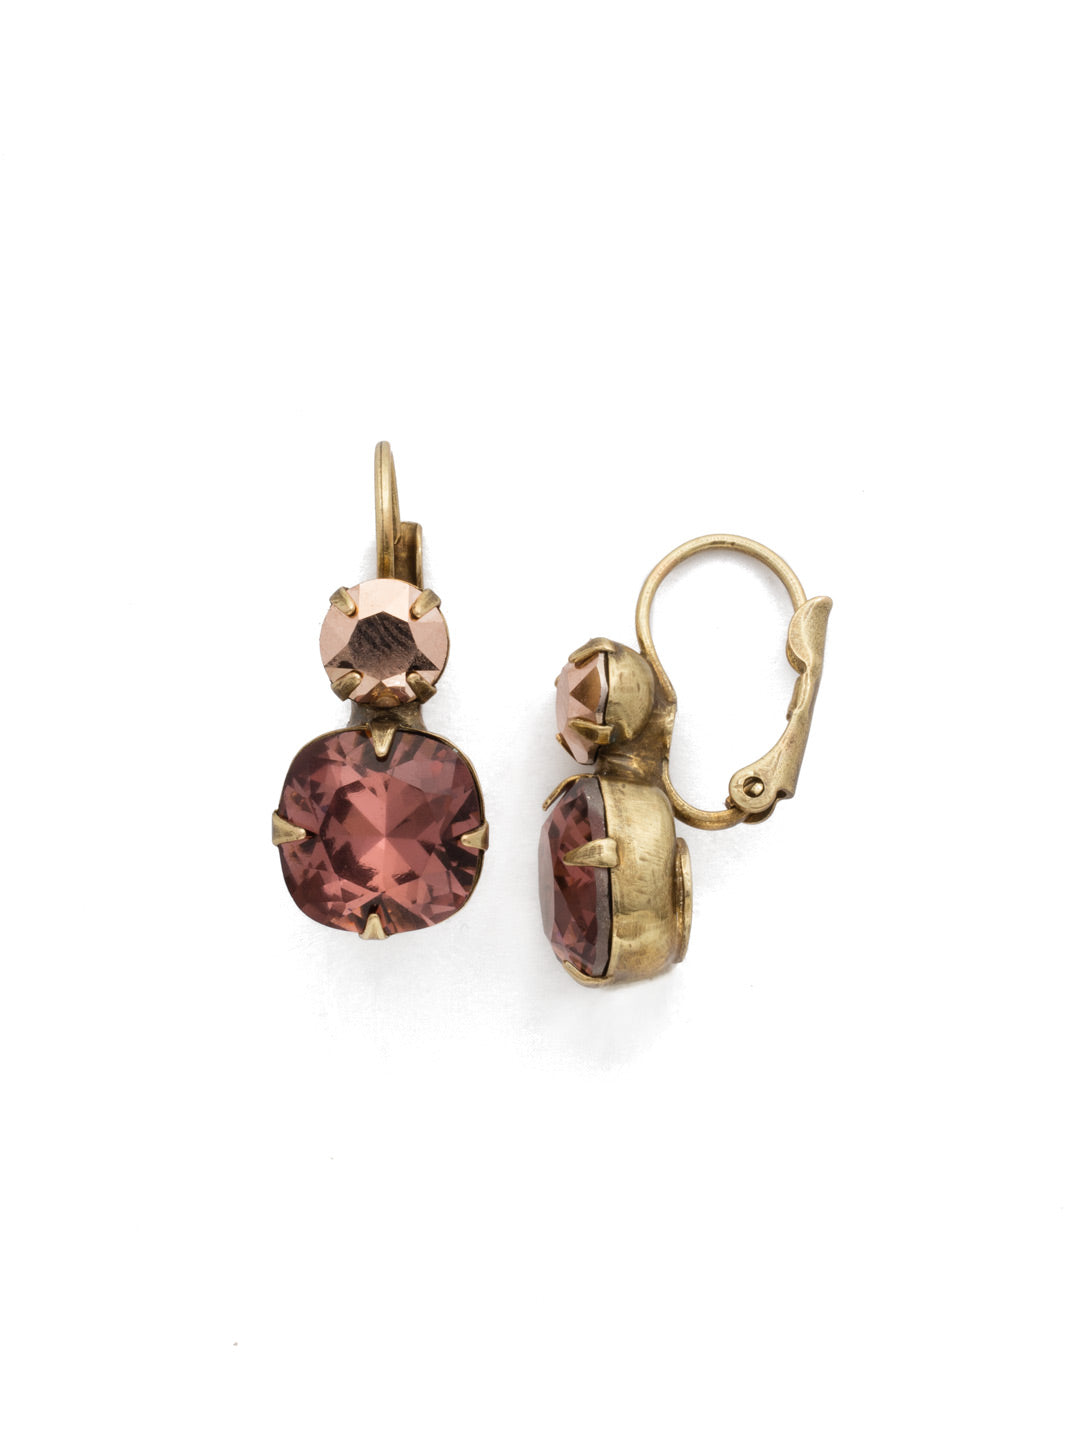 Roundabout Dangle Earring - EDH76AGM - <p>A round crystals sits perfectly atop one a cushion cut stone. The perfect amount of sparkle for every day and any occasion. From Sorrelli's Mahogany collection in our Antique Gold-tone finish.</p>